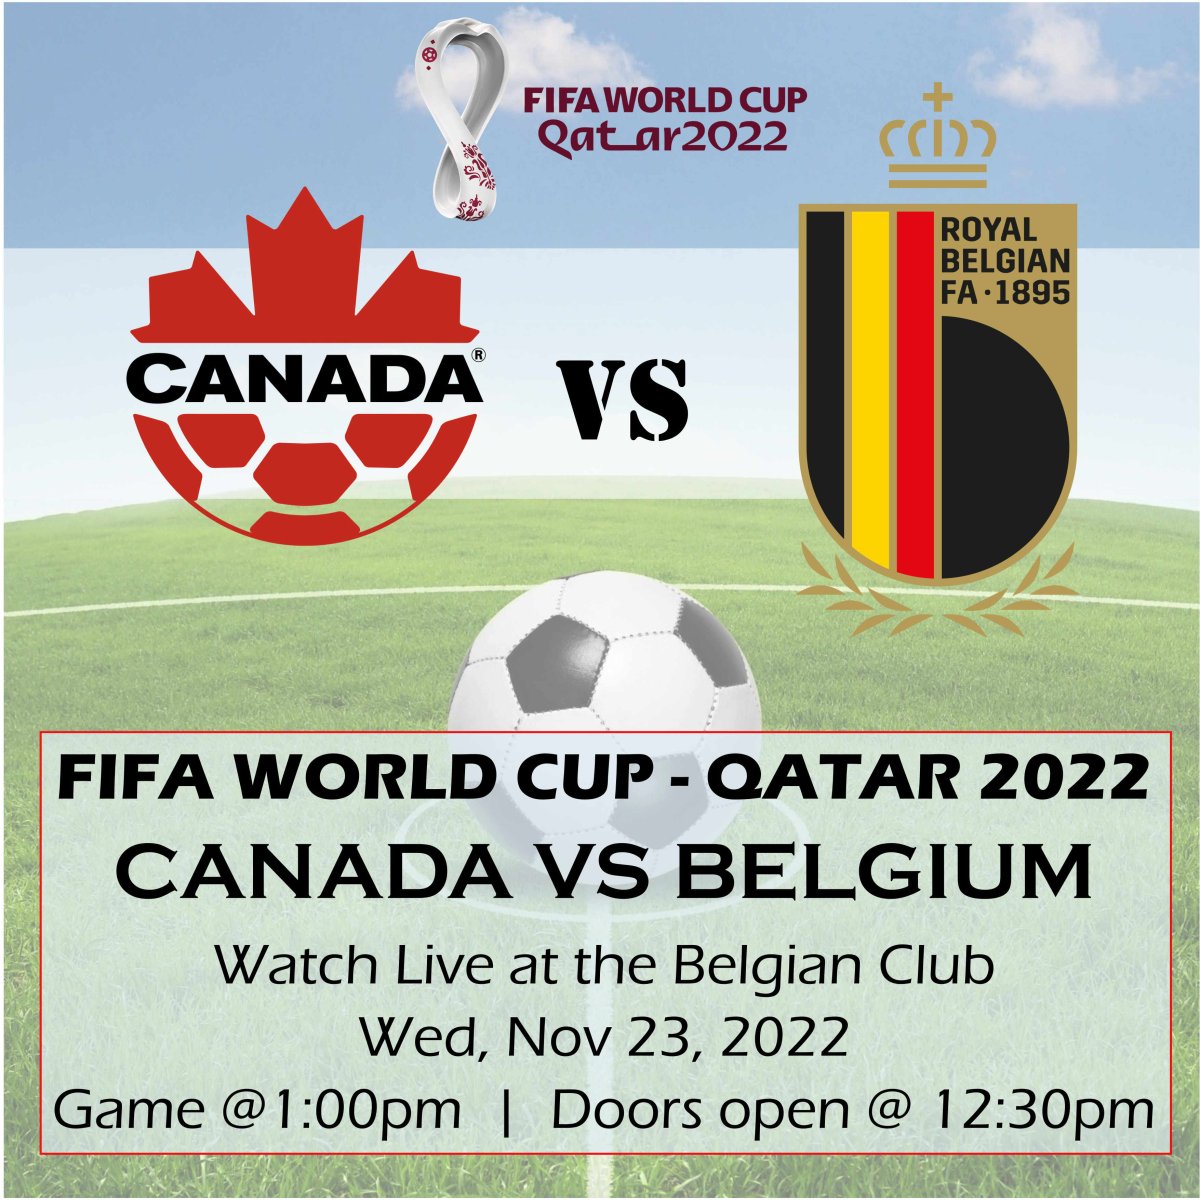 FIFA World Cup action is coming to the Belgian Club! The perfect game to enjoy at the Club is up first, Canada is back in the World Cup after 36 years and looking to impress while top contenders Belgium have their sights on winning it all after coming close in the last two tournaments. Catch all the excitement live from Qatar in the comfort of the Belgian Club on Wednesday November 23. We will be opening early at 12:30pm for match start at 1:00. Don't forget your team gear!.